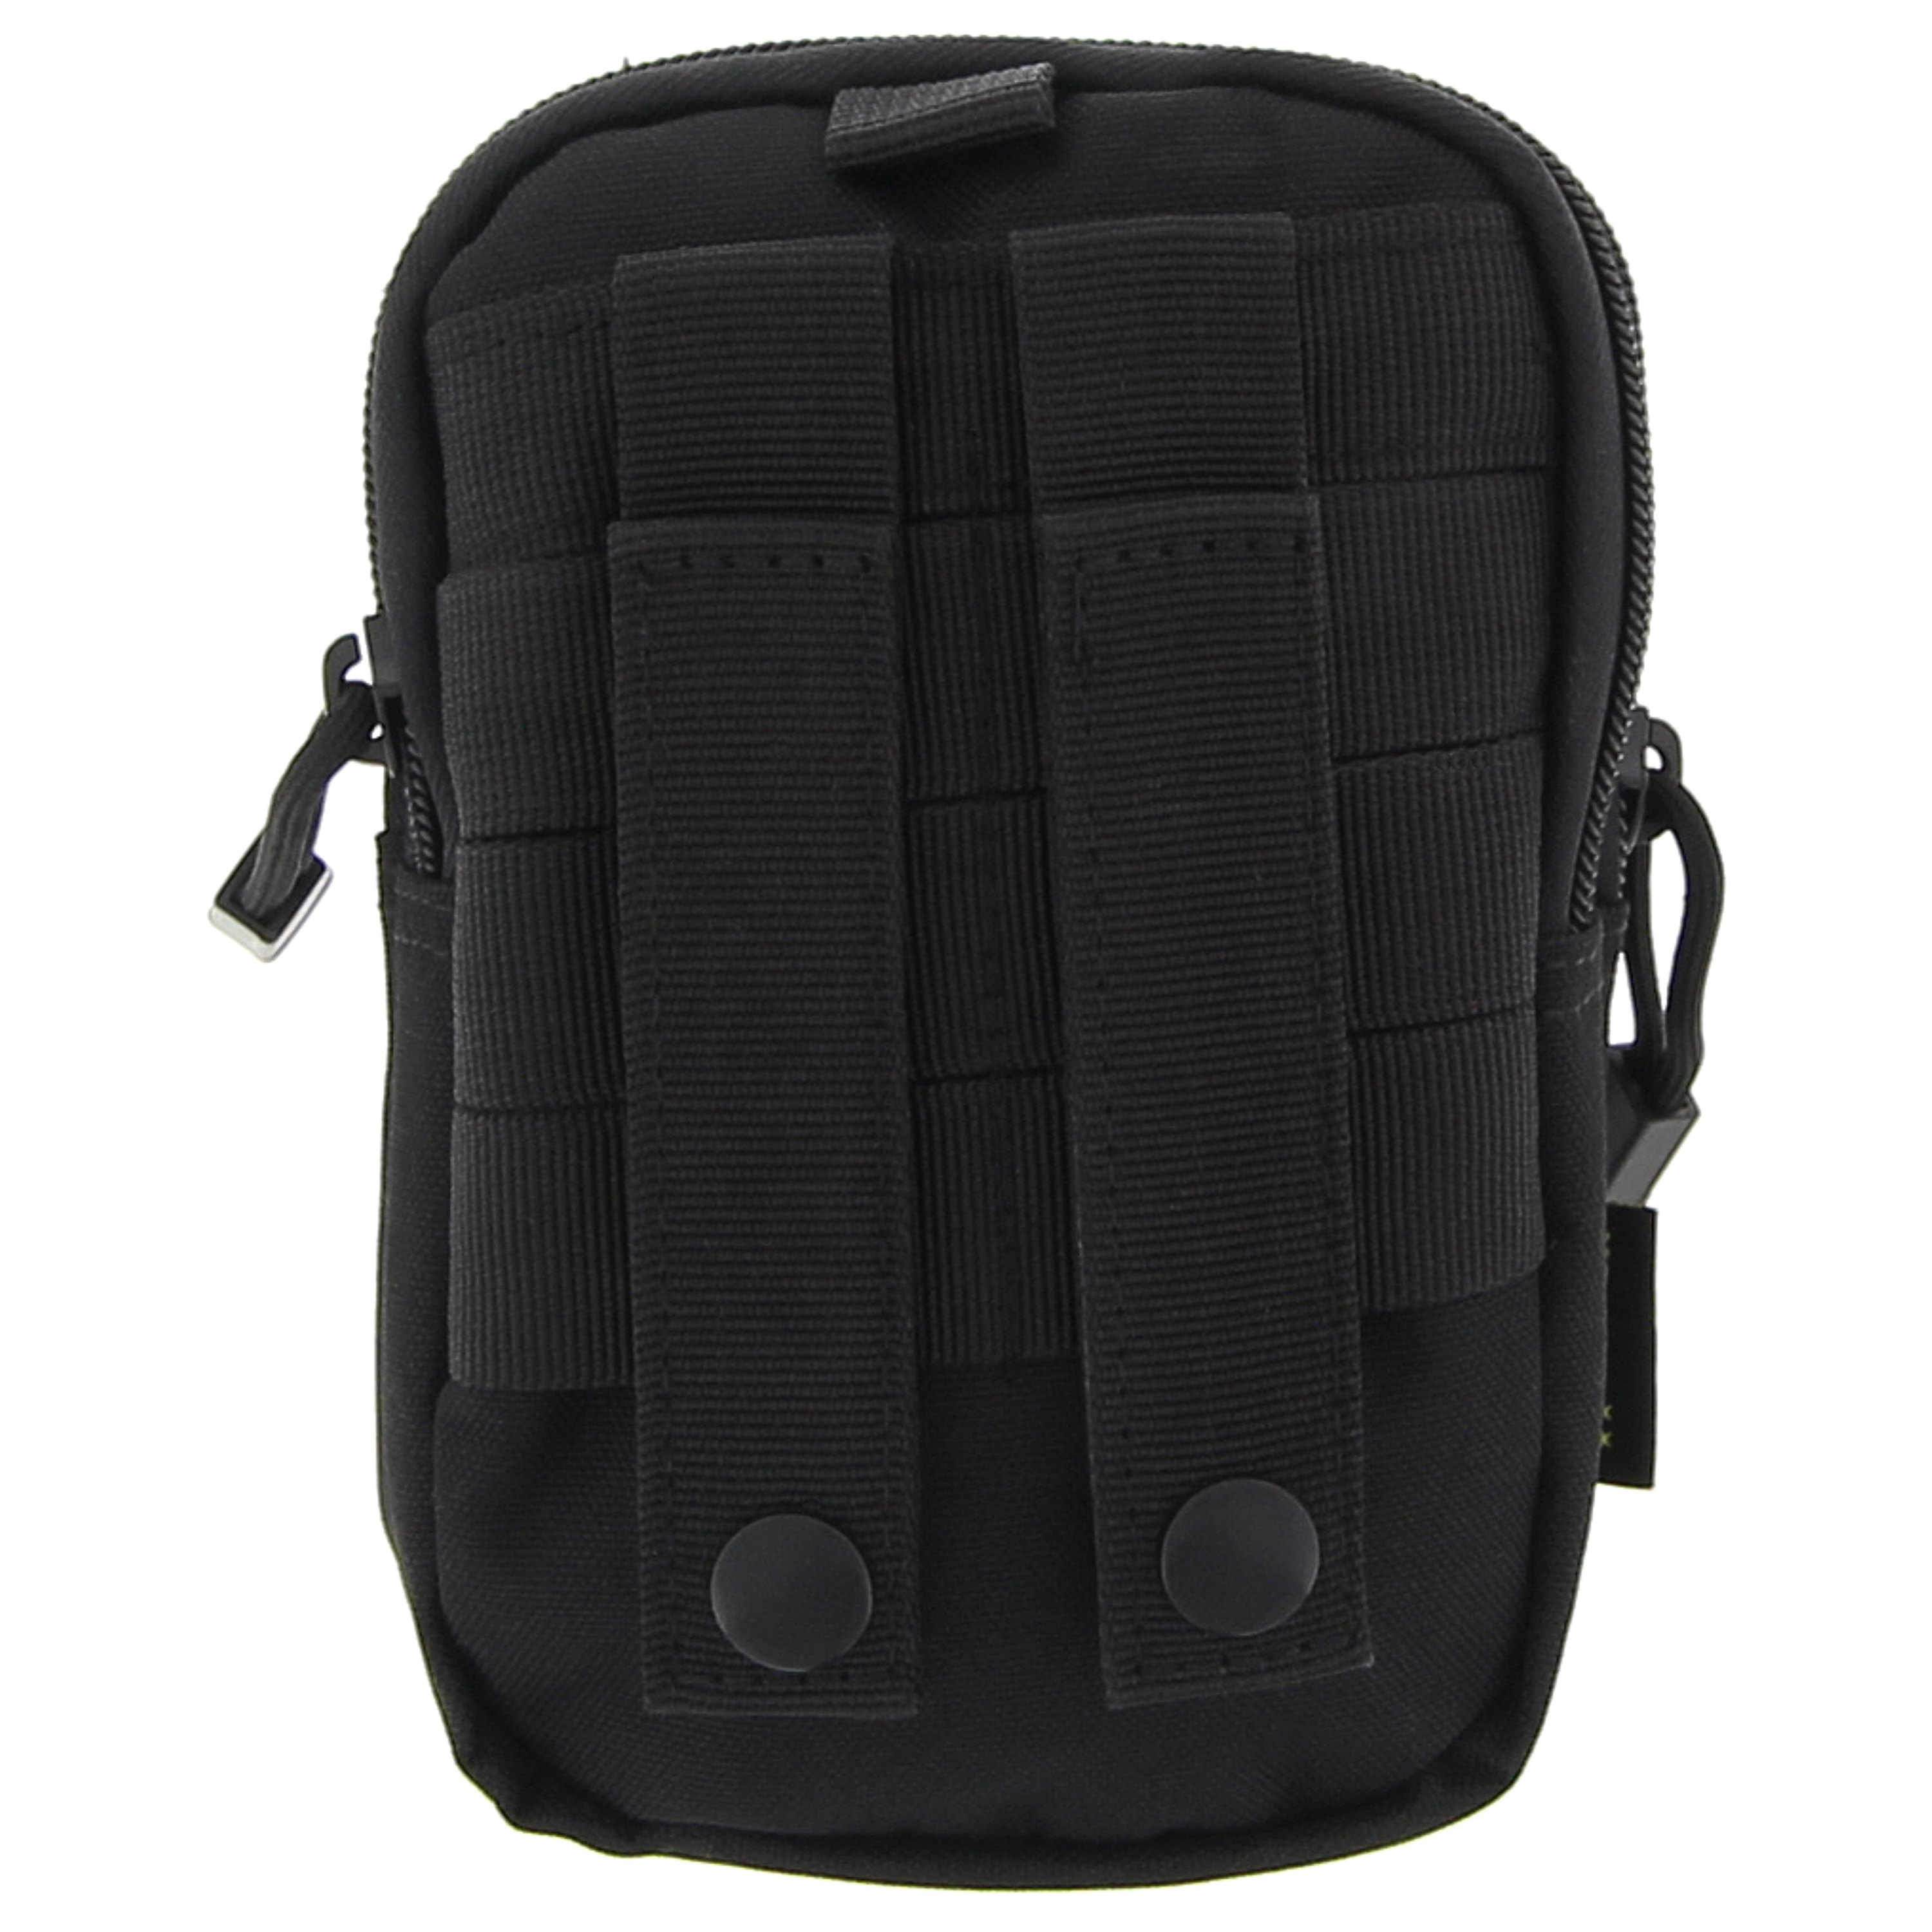 Purchase the Coptex Tac-Bag IV black by ASMC